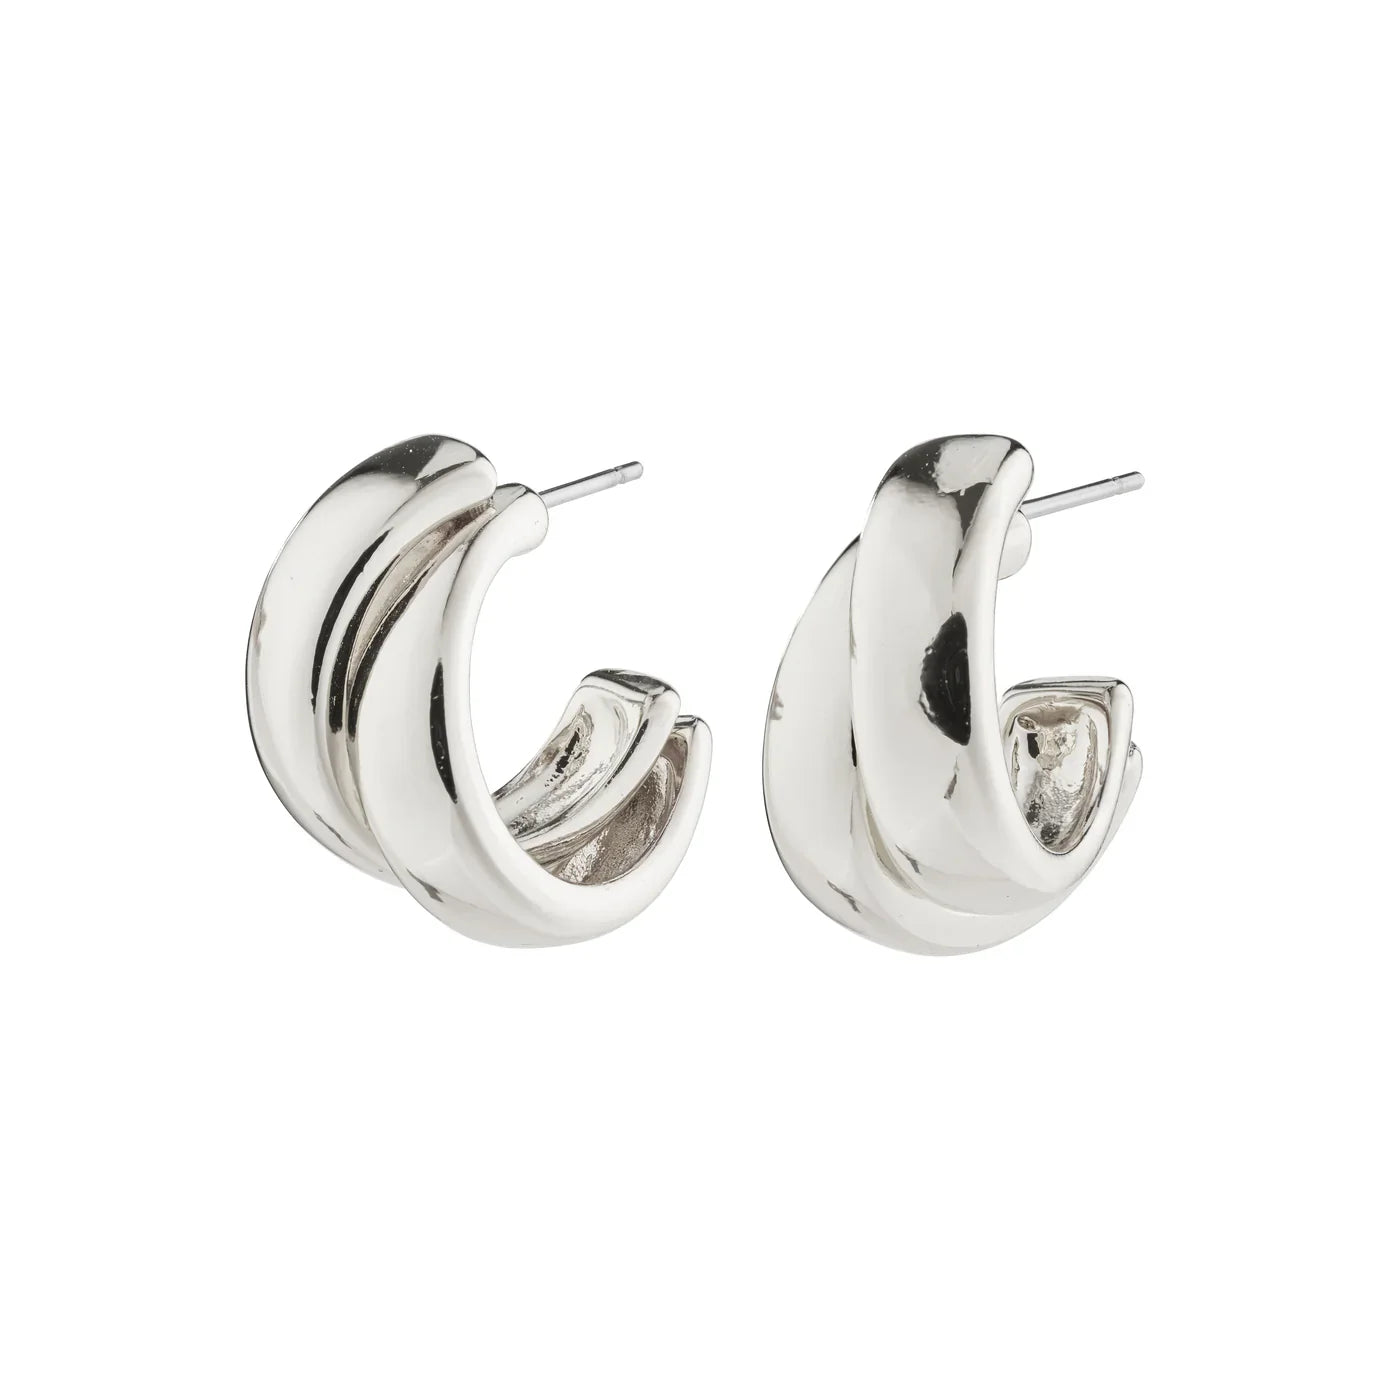 ORIT RECYCLED EARRINGS SILVER PLATED